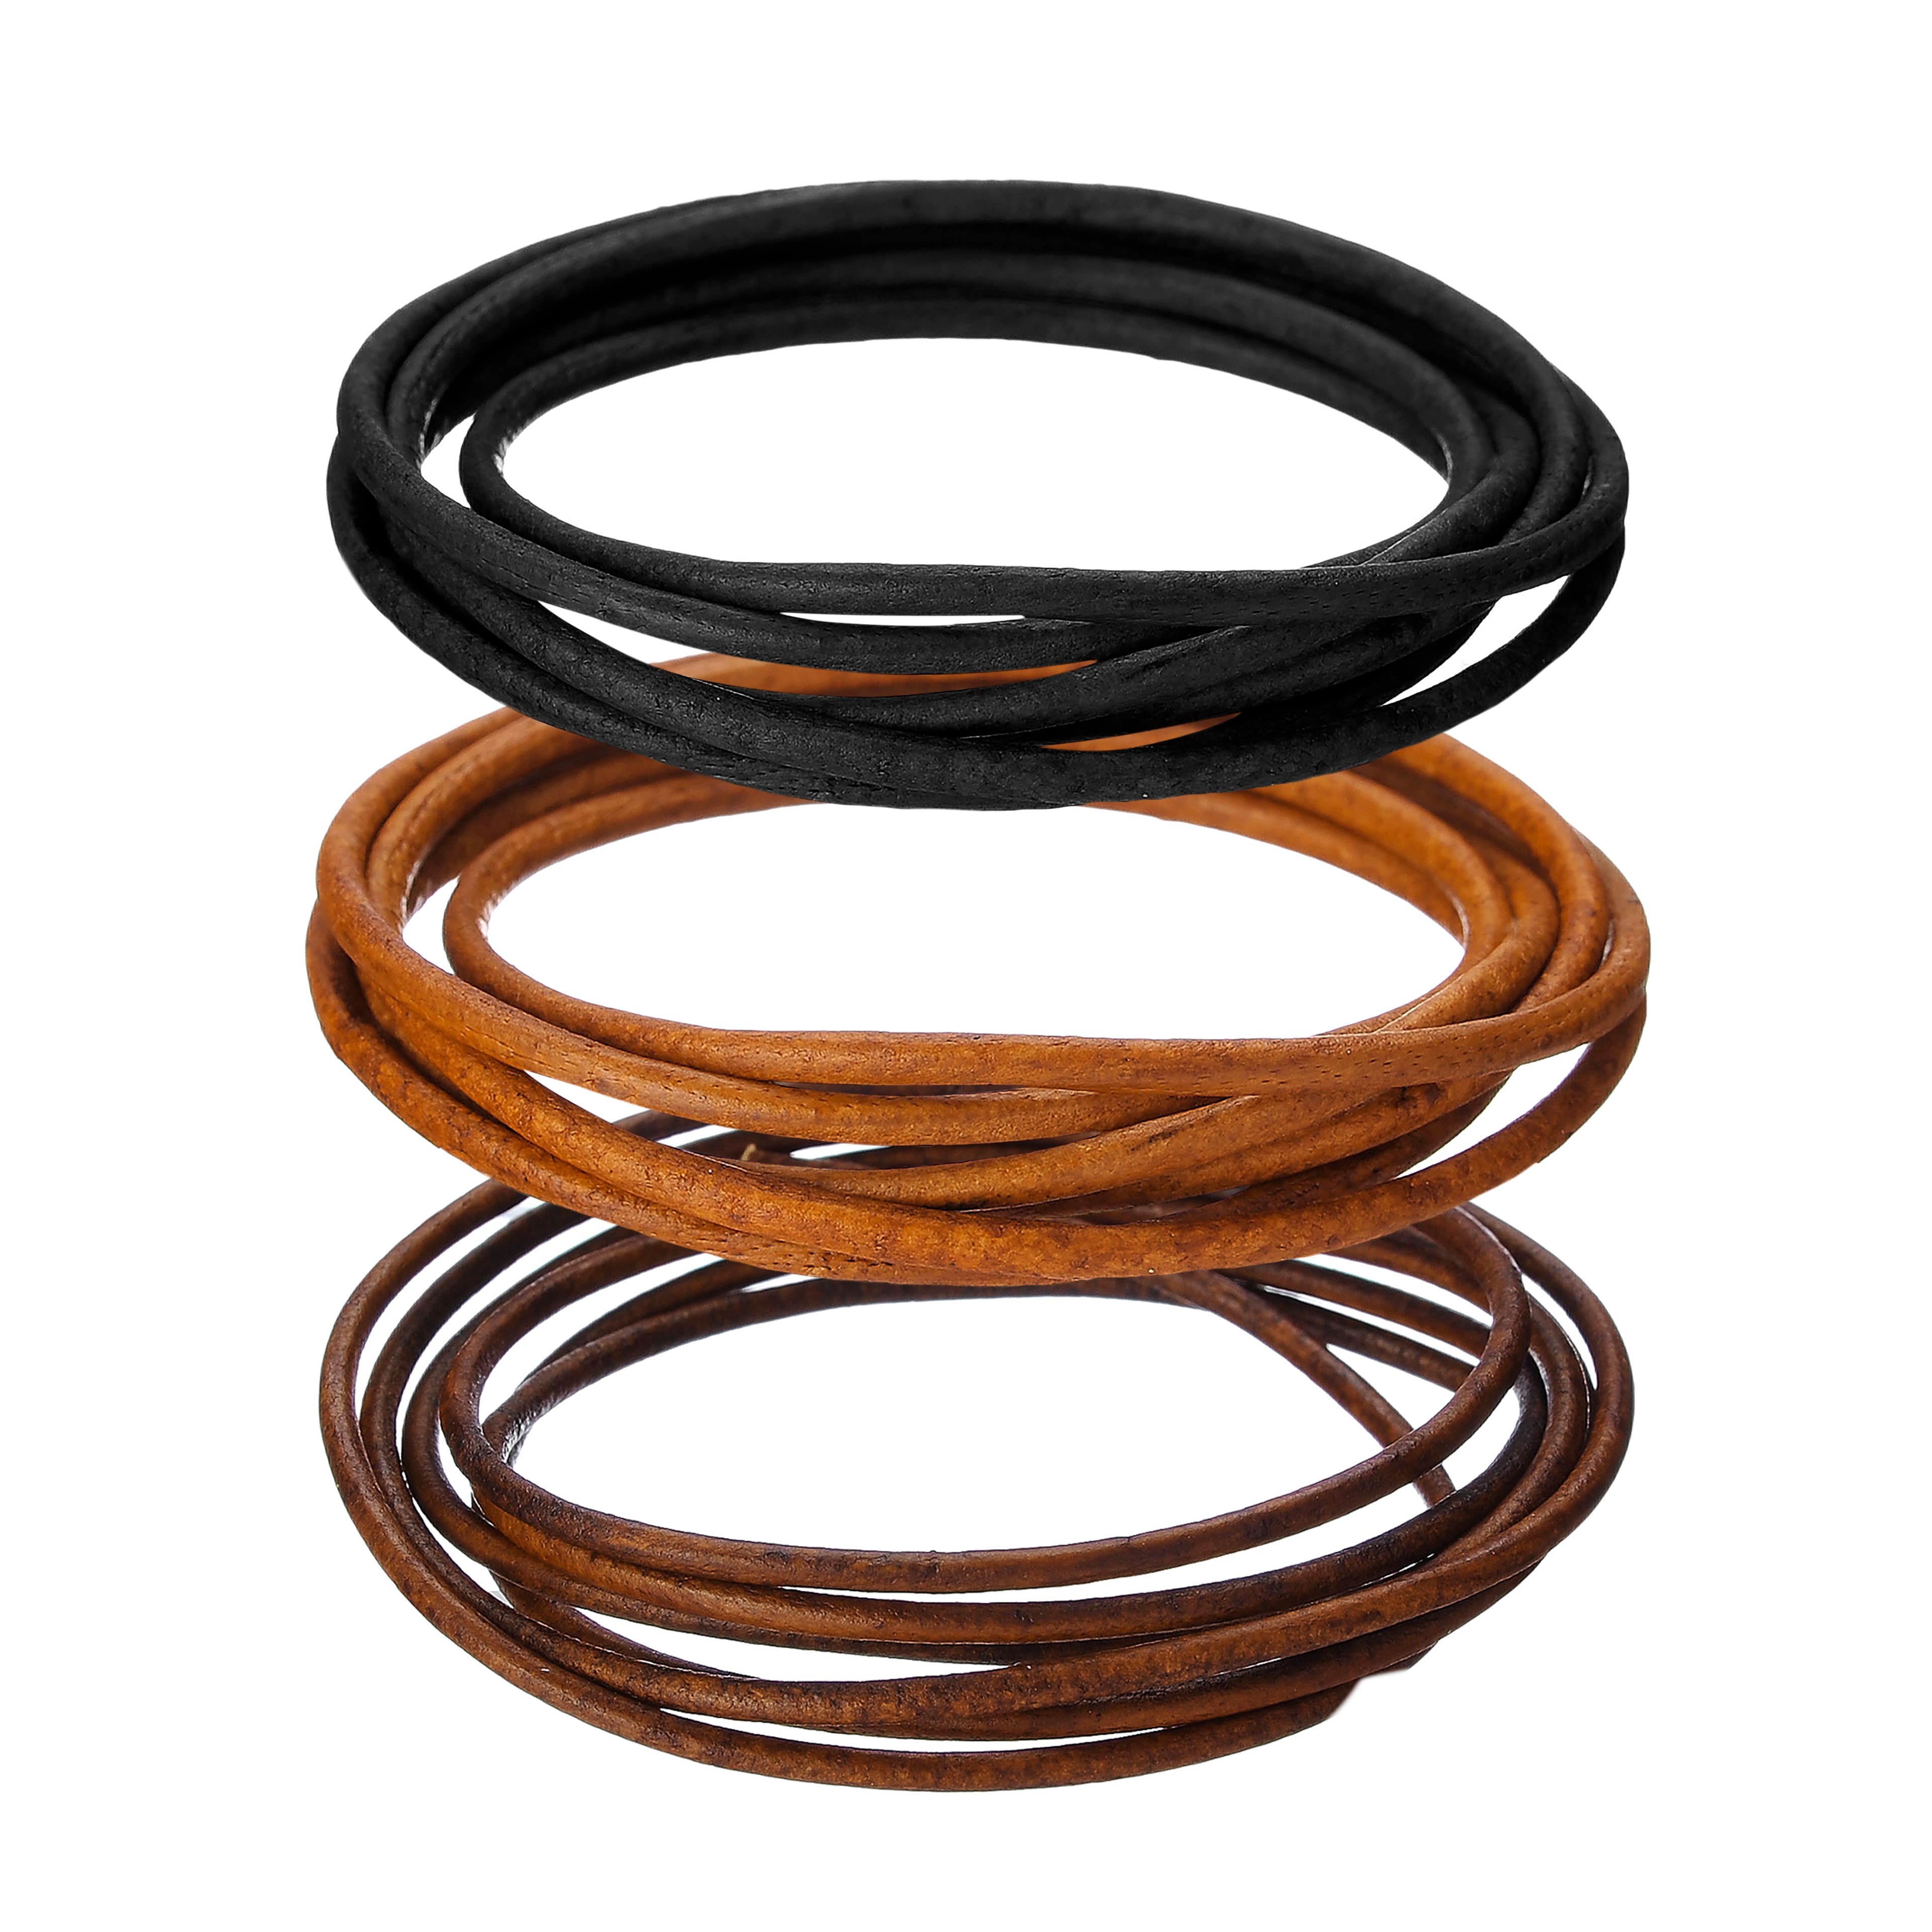 Multicolor Leather Round Cording by Bead Landing&#x2122; 